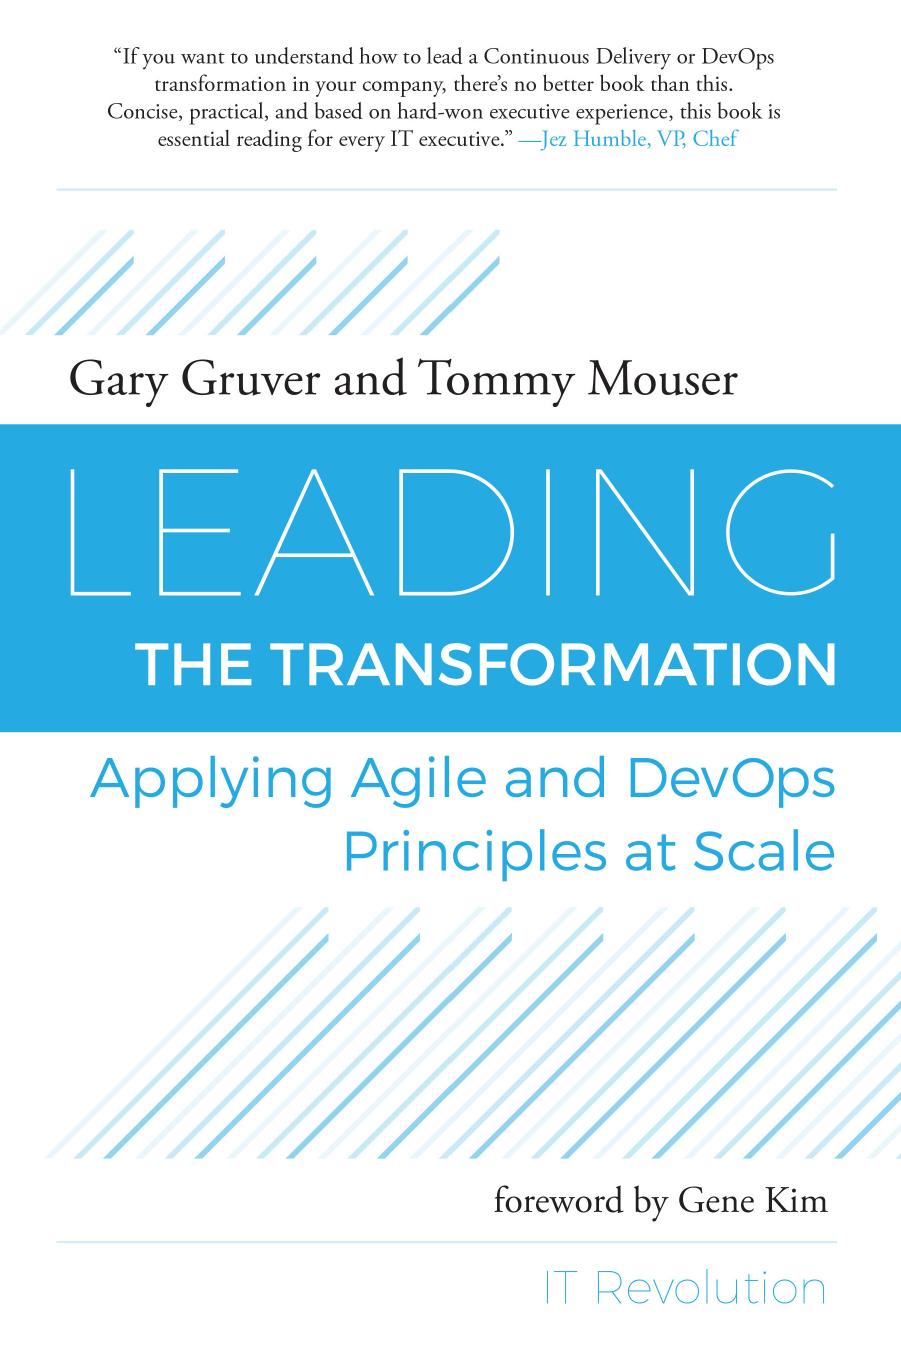 Leading the Transformation: Applying Agile and DevOps Principles at Scale